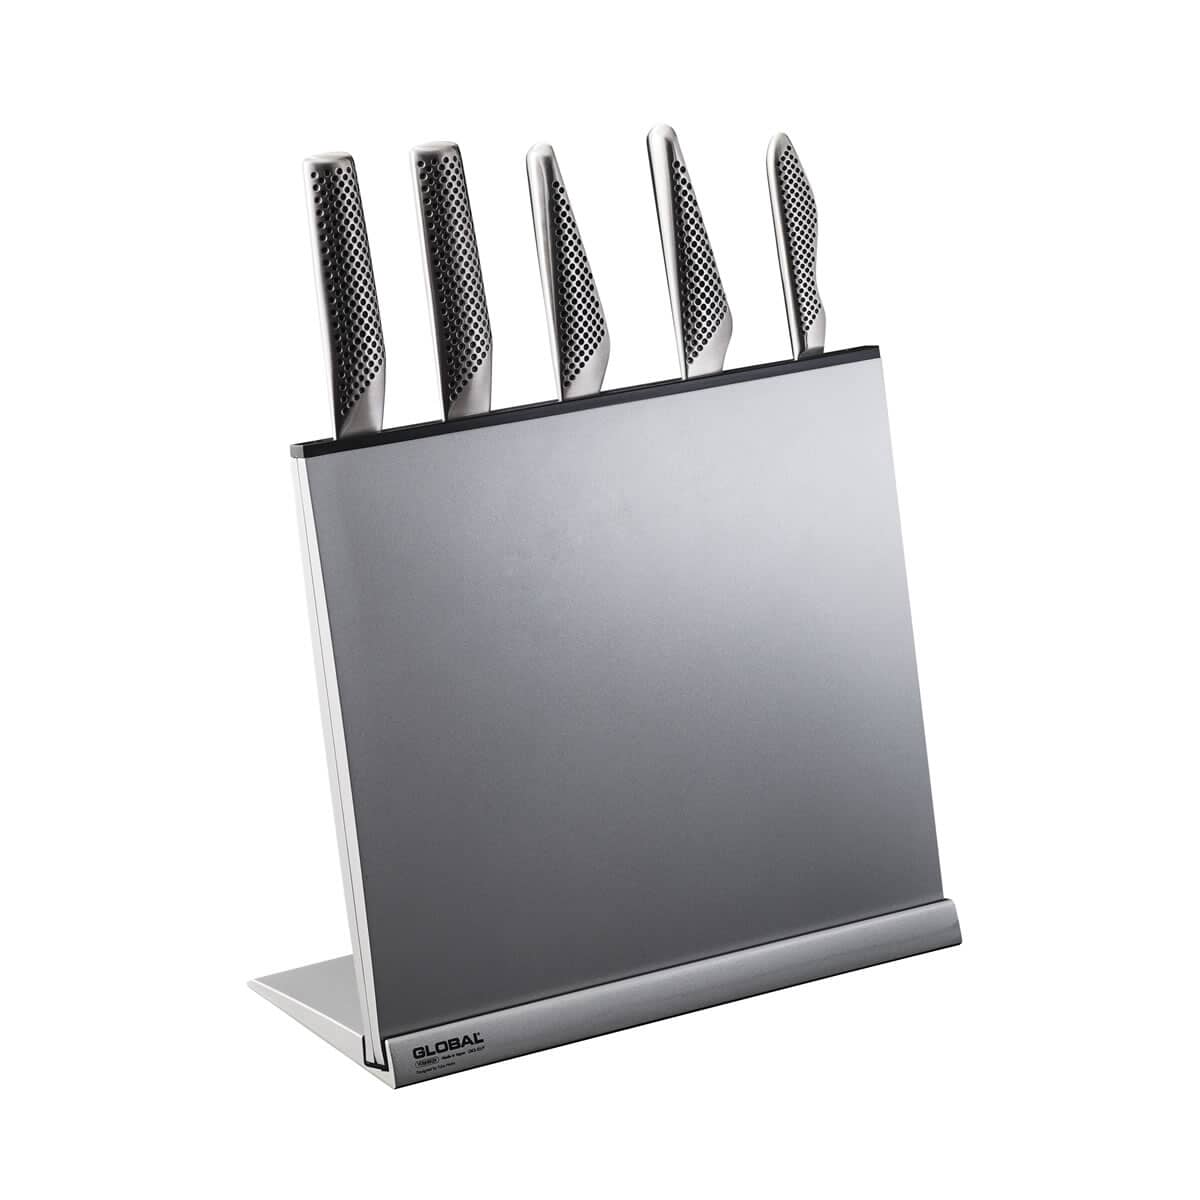 Global Knife Block Small - Holds Up To 5 Knives - (GKS-02) - eCookshop